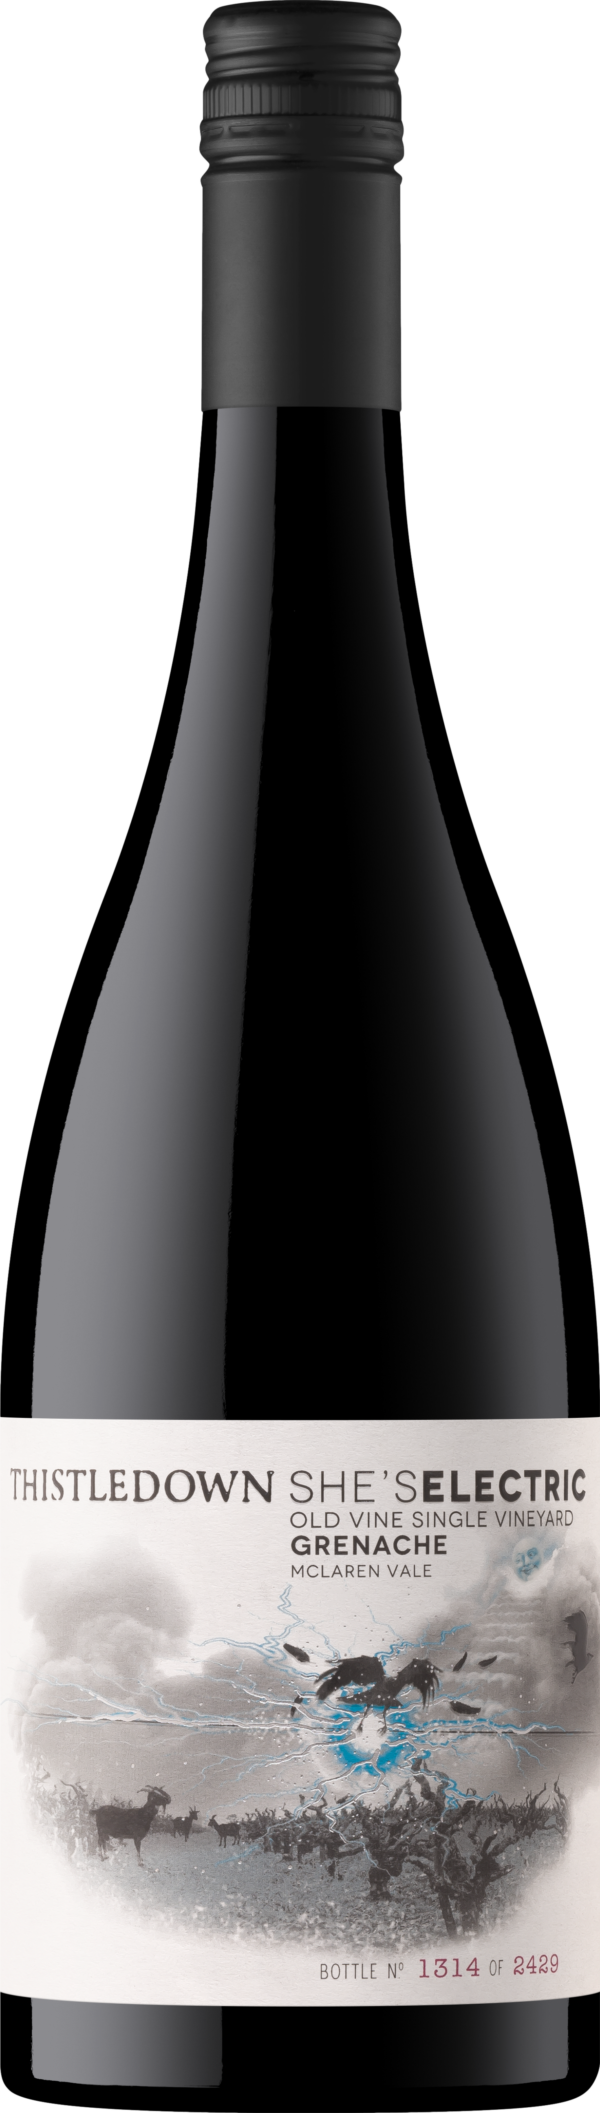 Product image of Thistledown She's Electric Grenache 2021 from 8wines